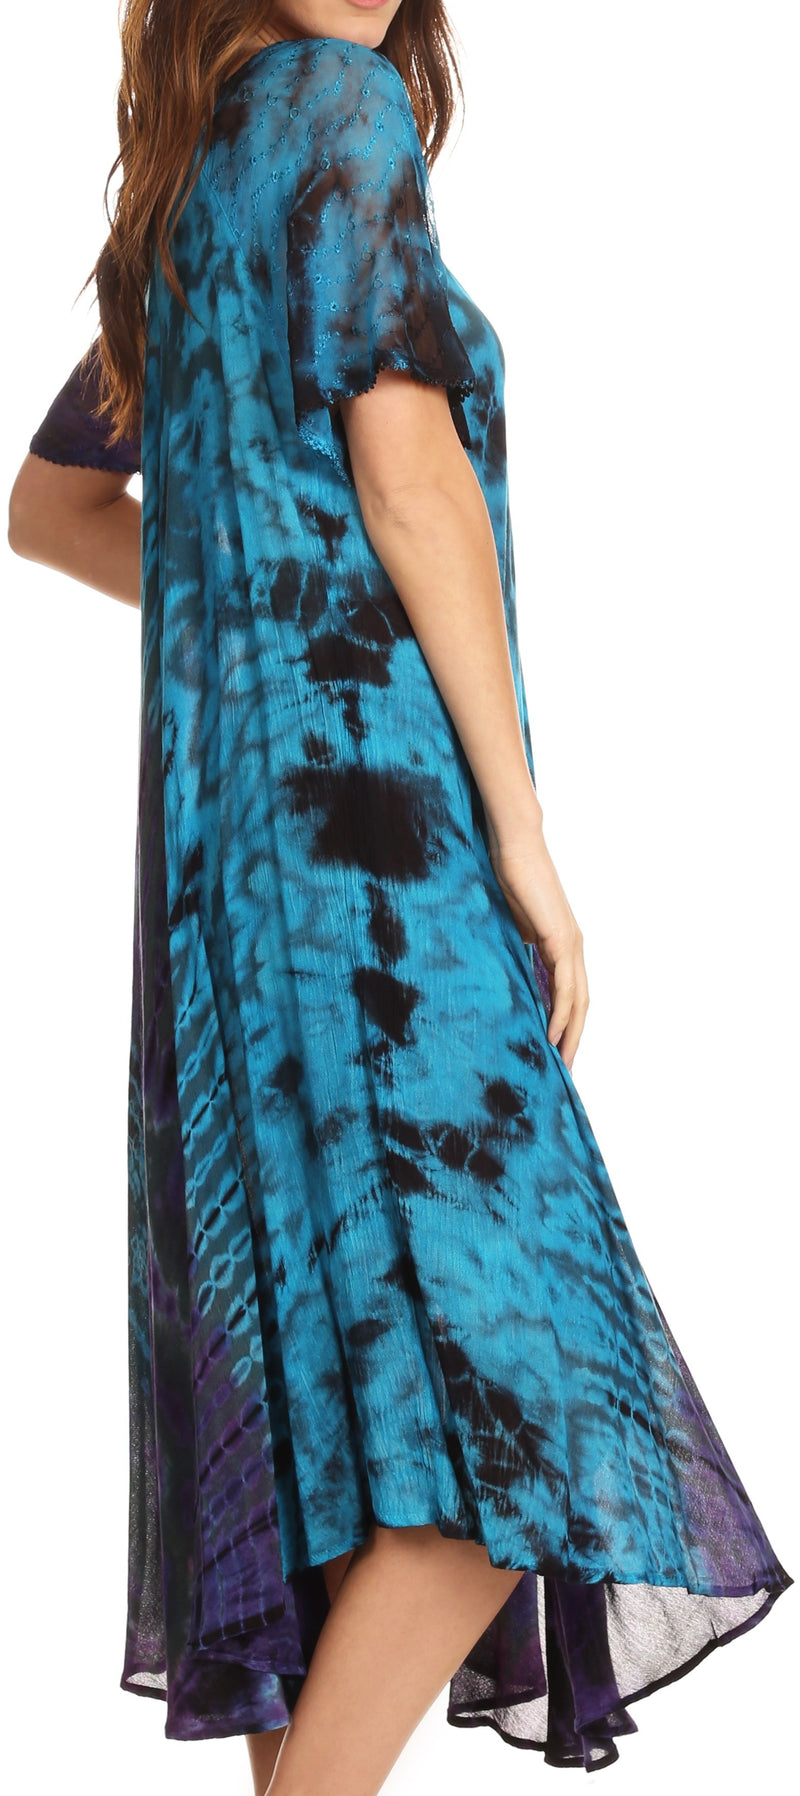 Sakkas Ria Tie Dye Embroidered Cap Sleeve Wide Neck Caftan Dress / Beach Cover Up